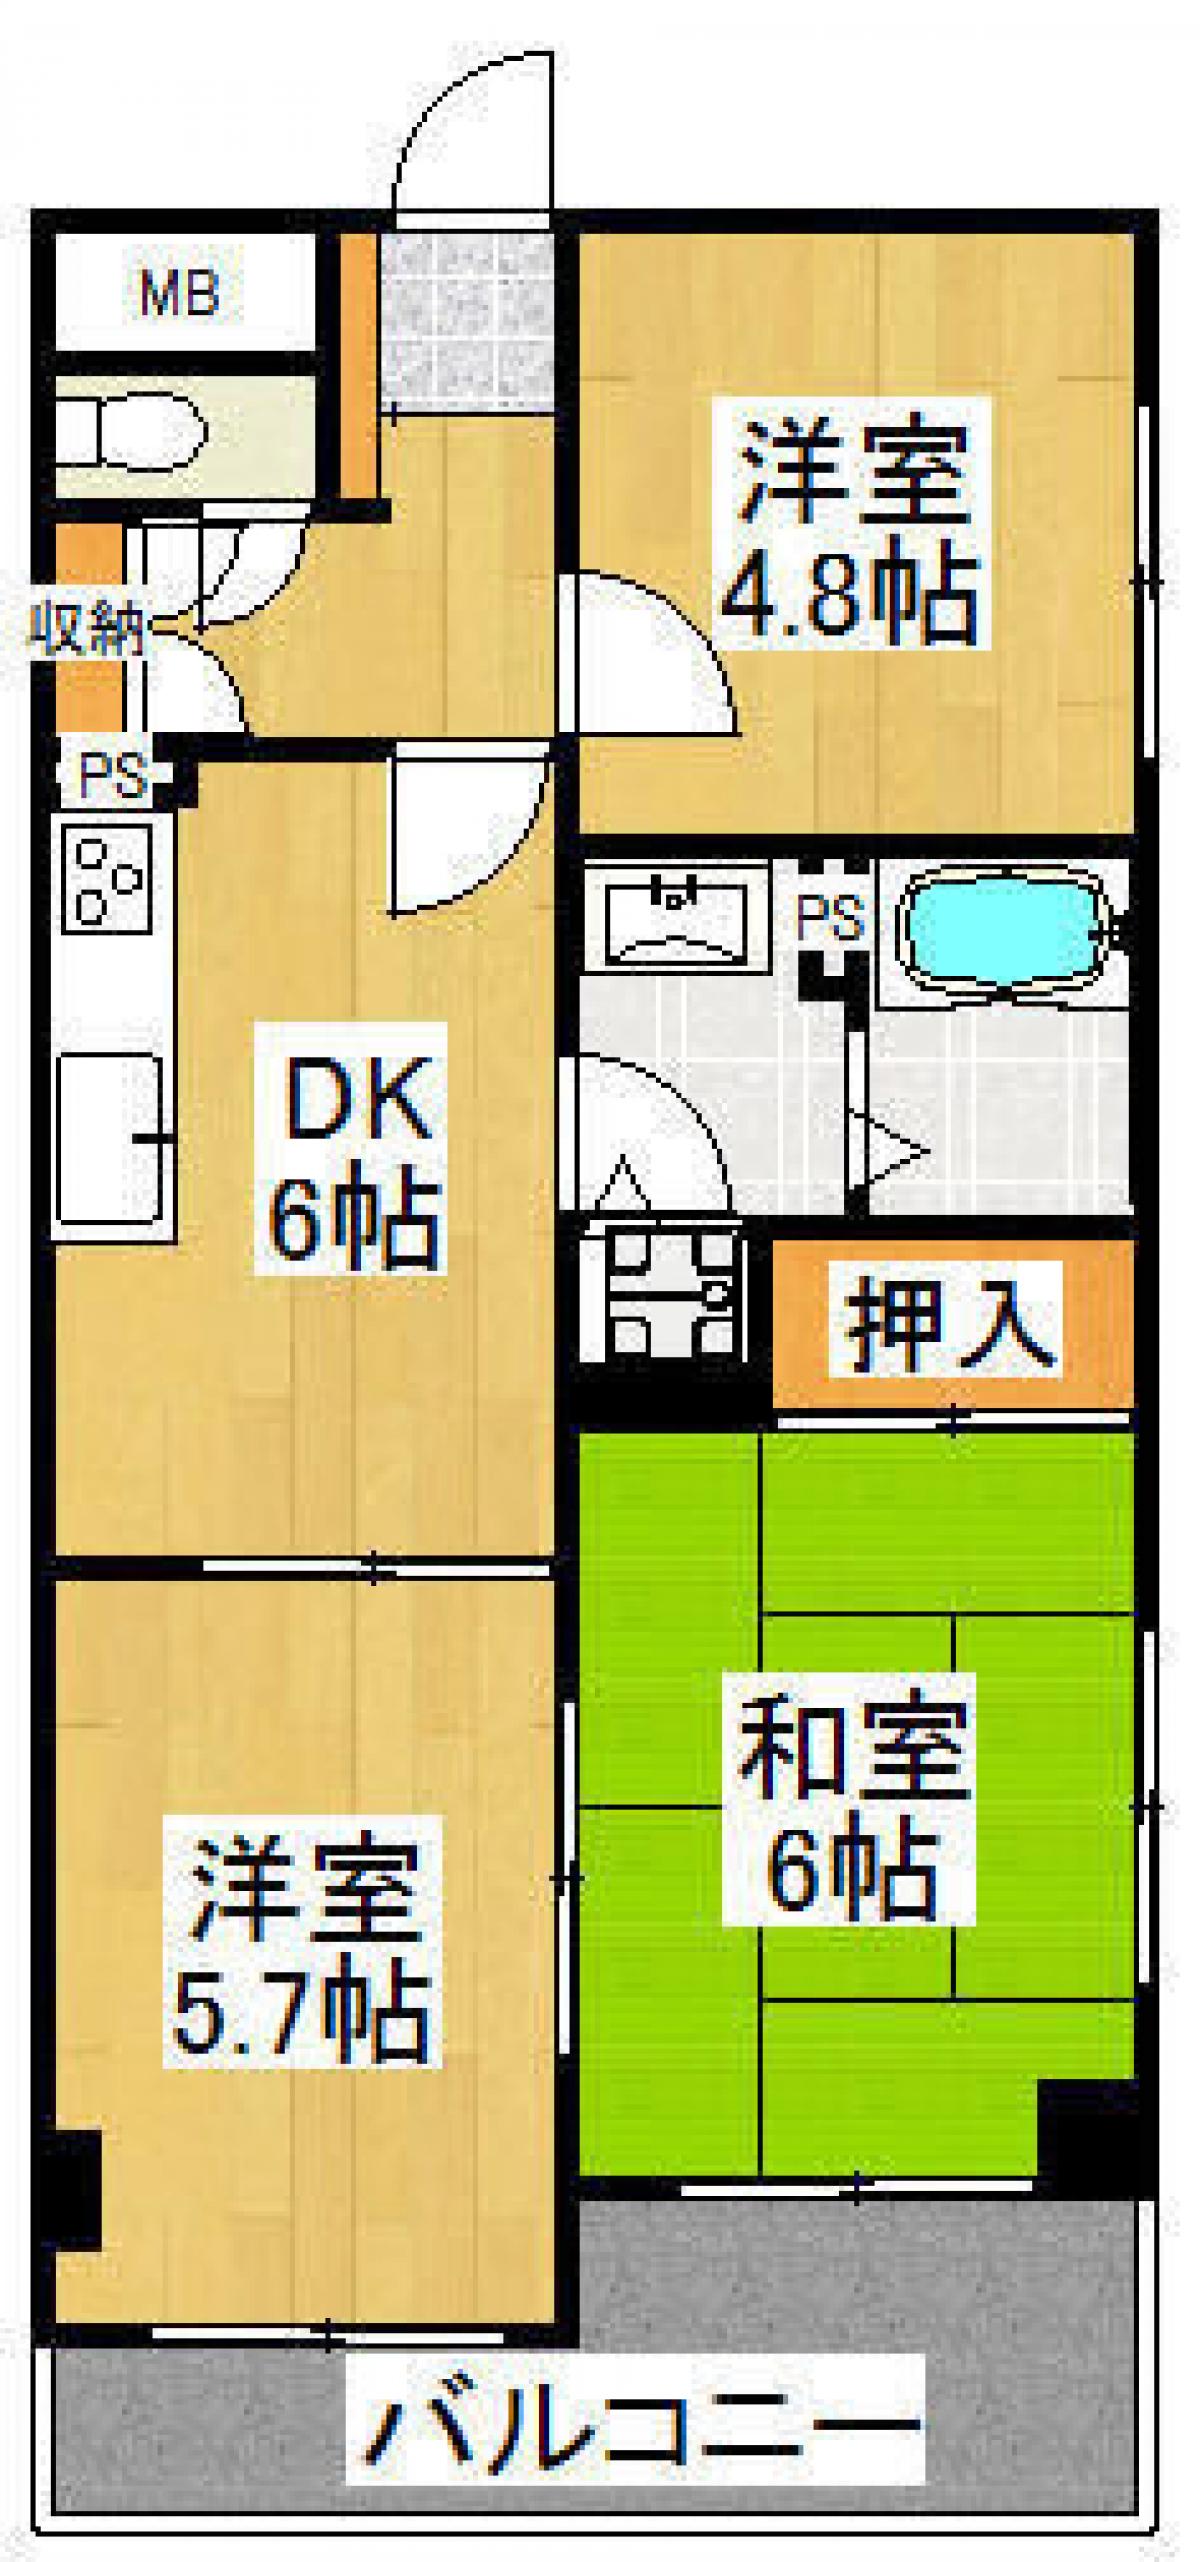 Picture of Apartment For Sale in Kiyose Shi, Tokyo, Japan